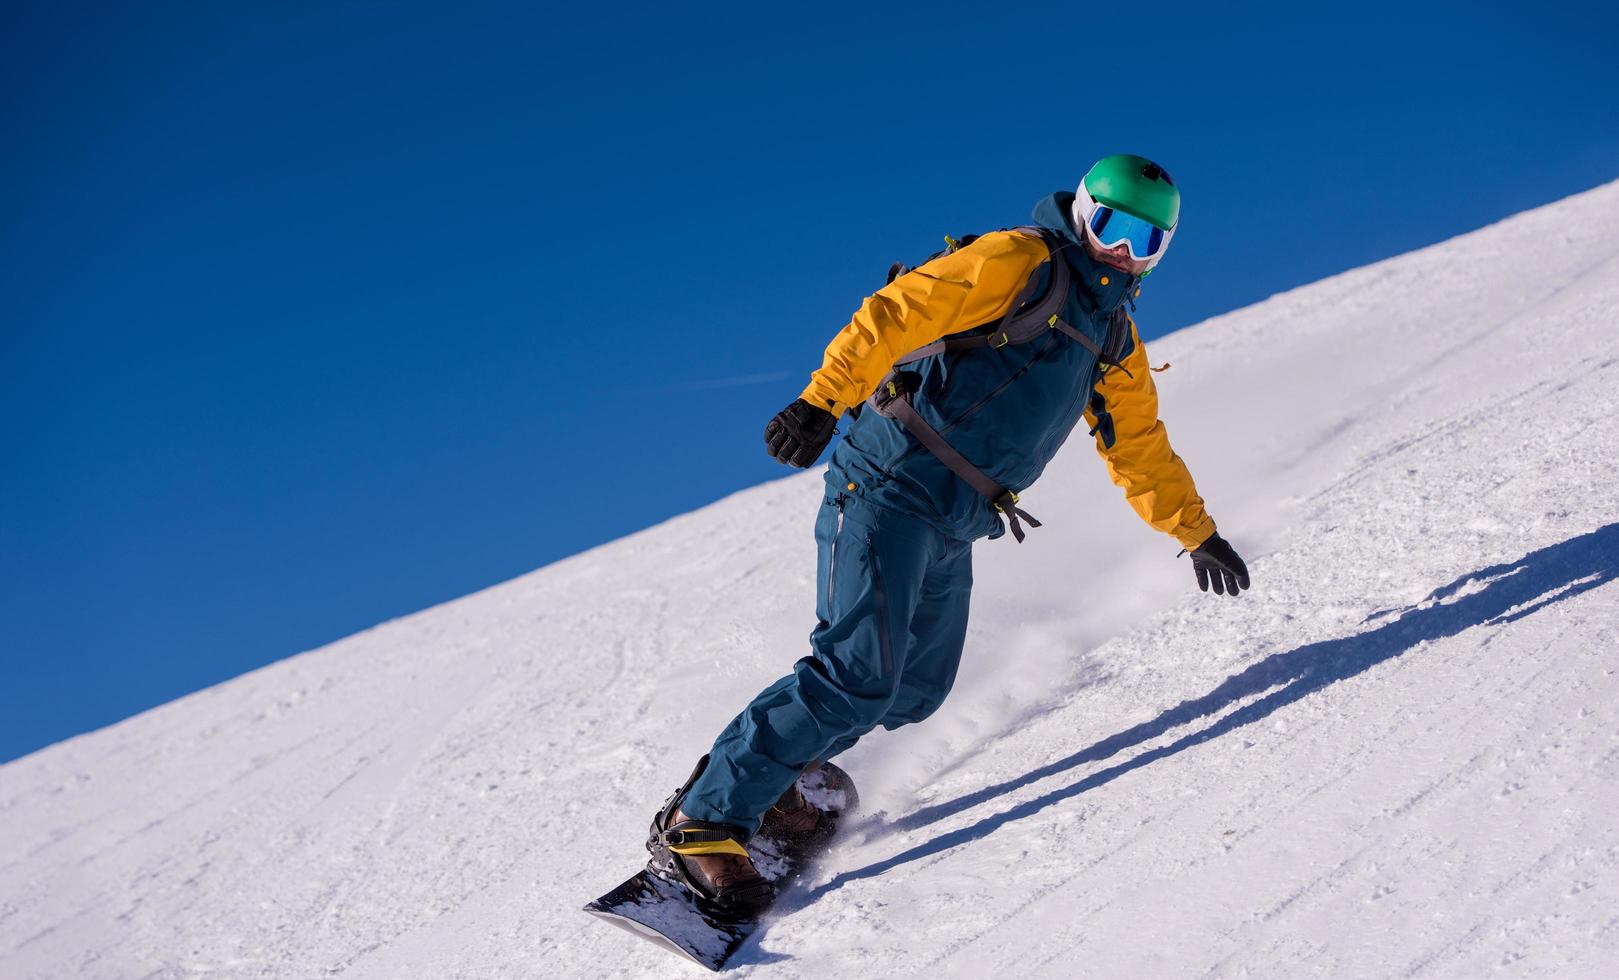 snowboarder running down the slope and ride free style photo